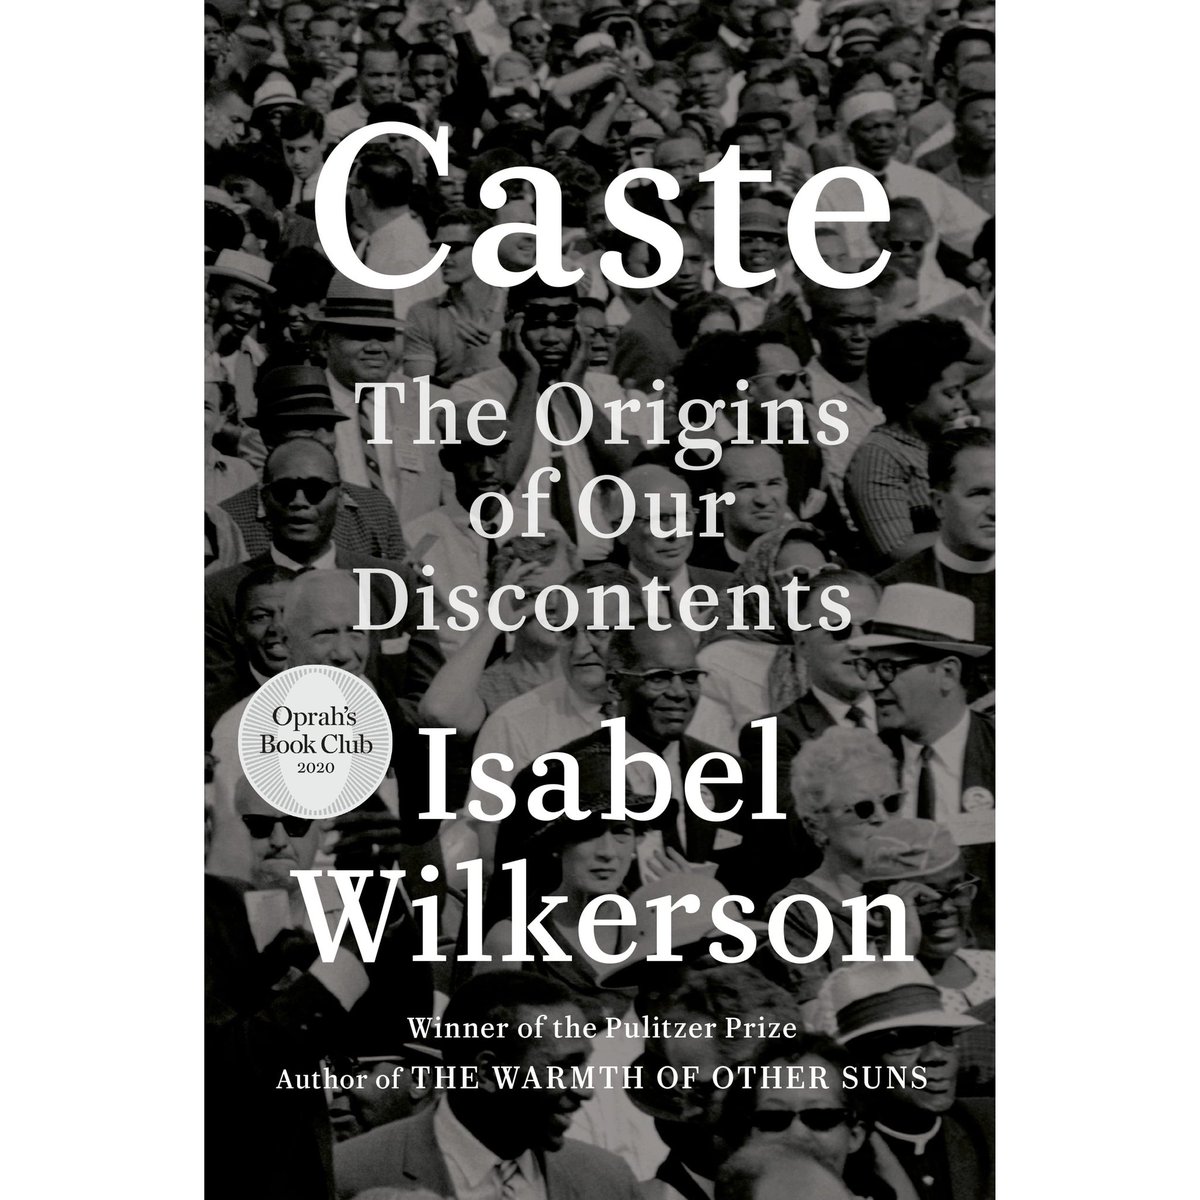 Caste: The Origins of Our Discontentsby Isabel Wilkerson. Wilkerson illustrates how America today and throughout its history has been shaped by a hidden caste system, a rigid hierarchy of human rankings.